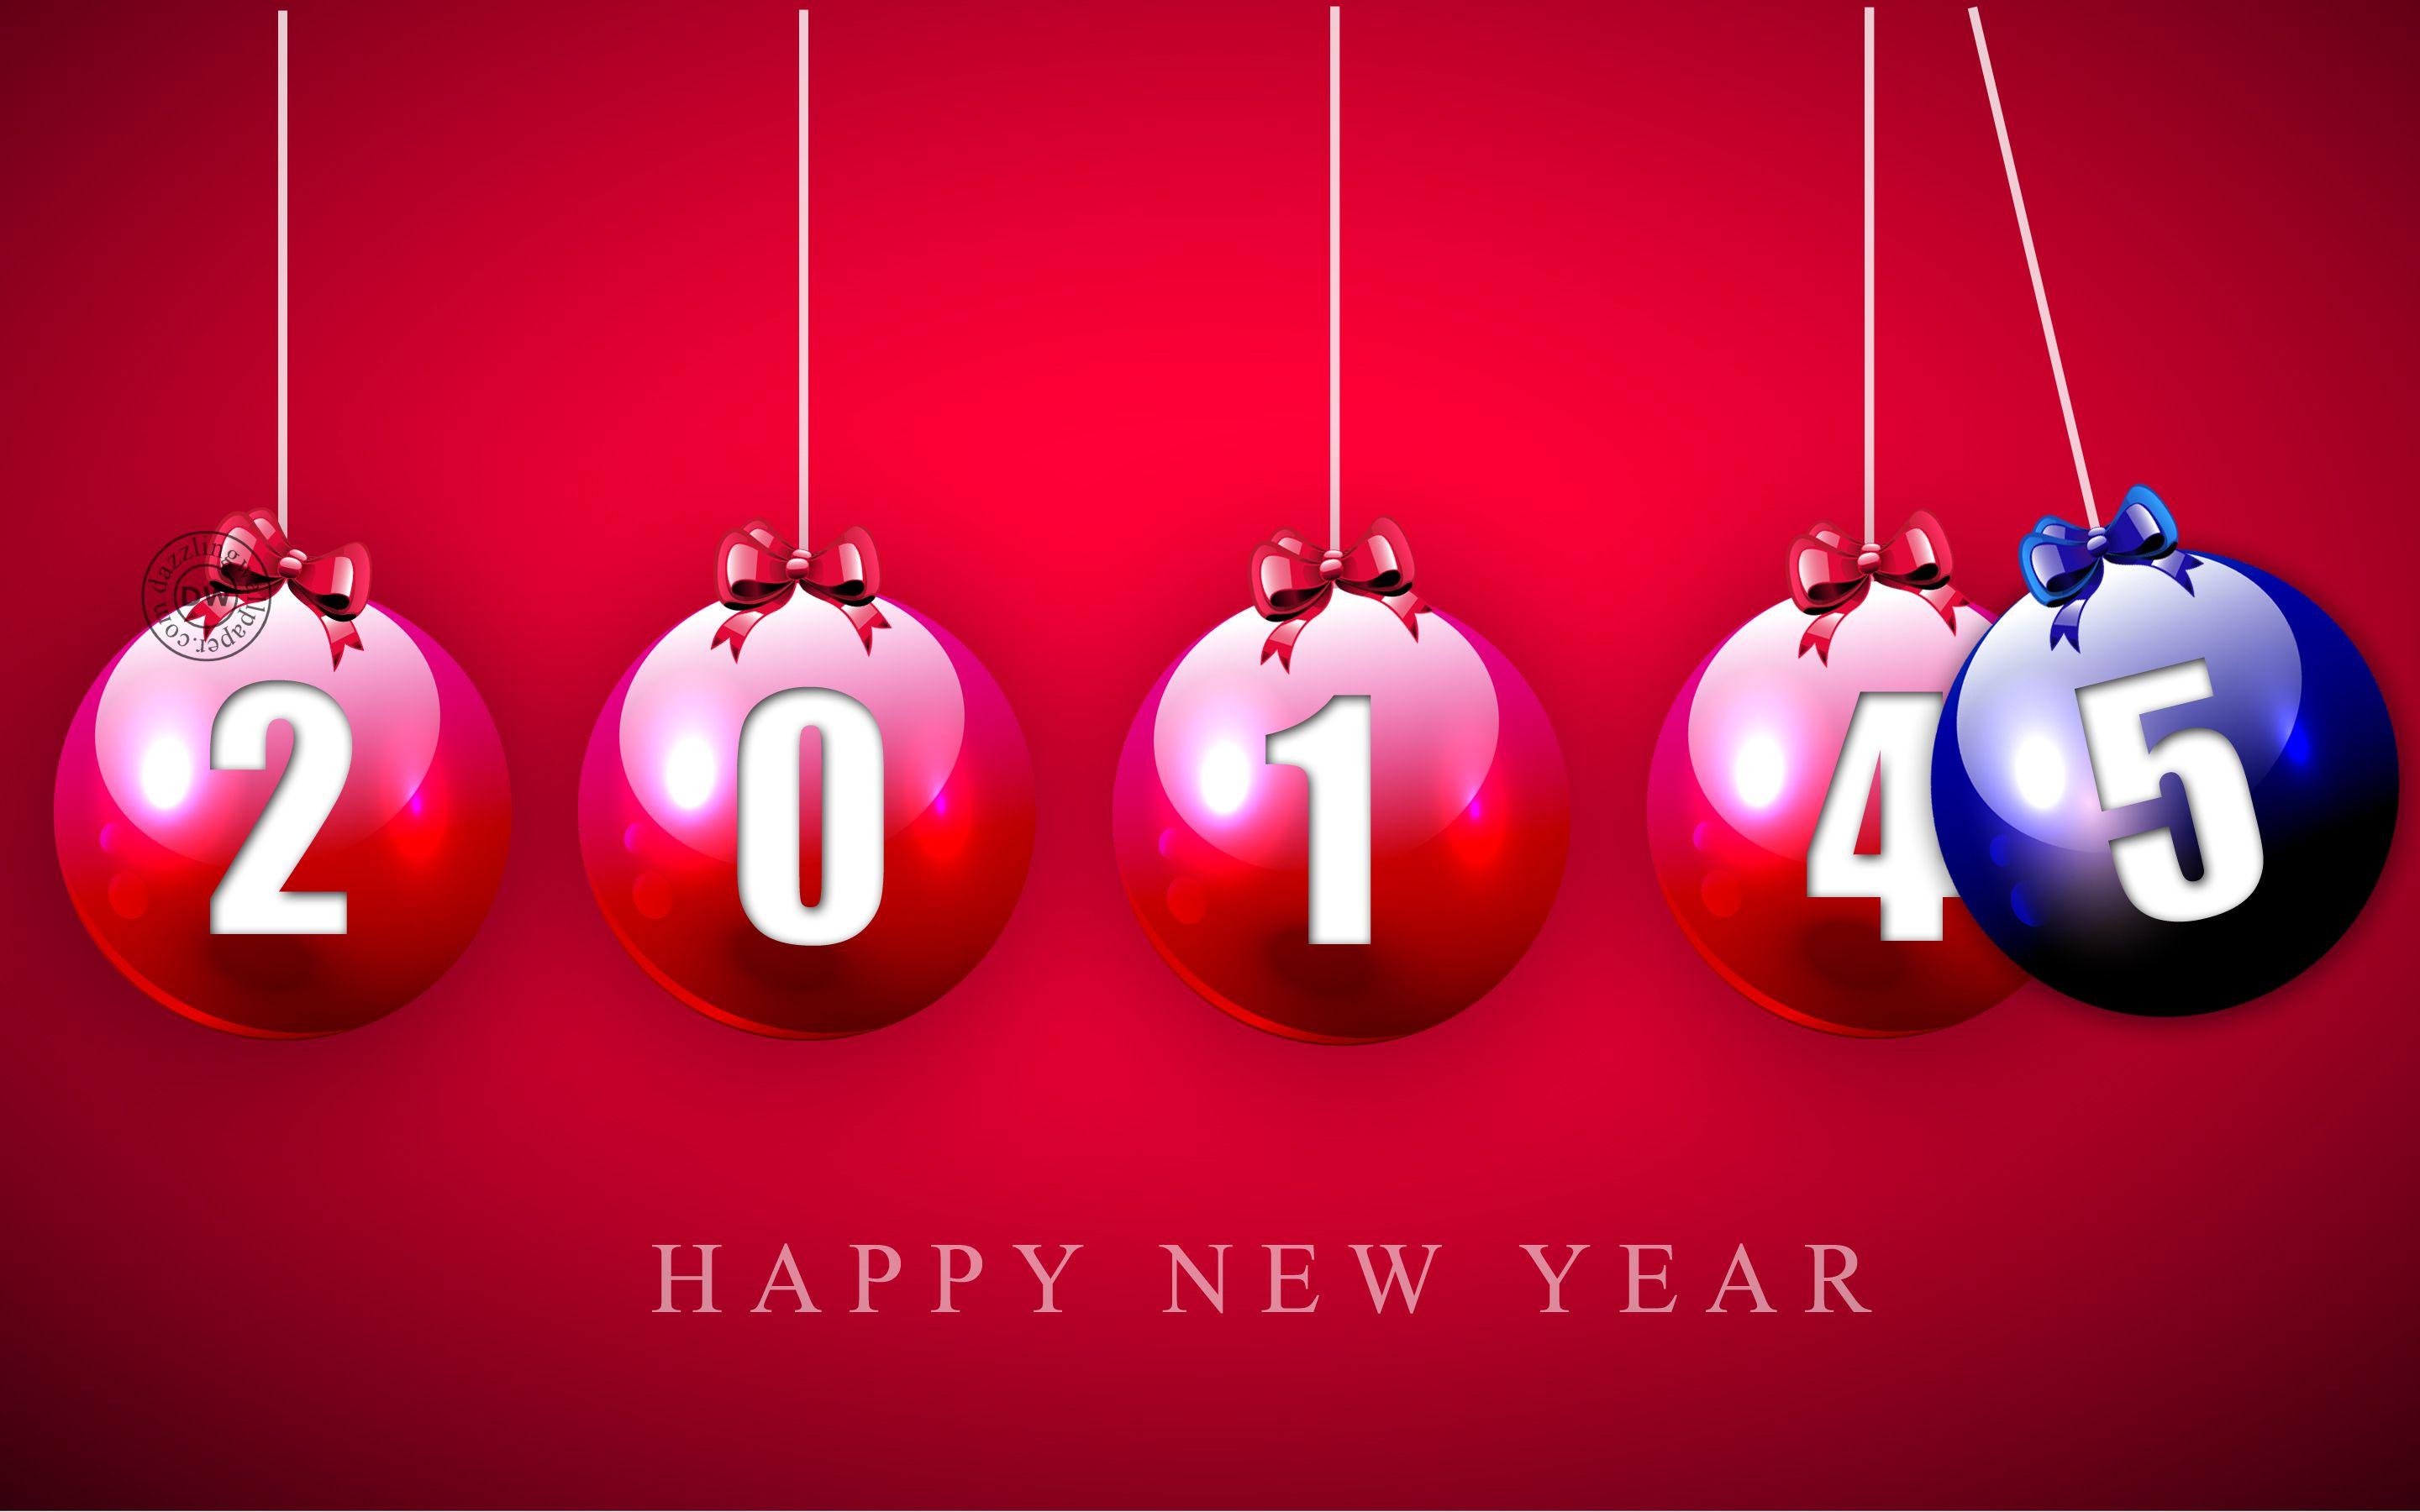 Free Download Best Wallpaper of New Year 2015